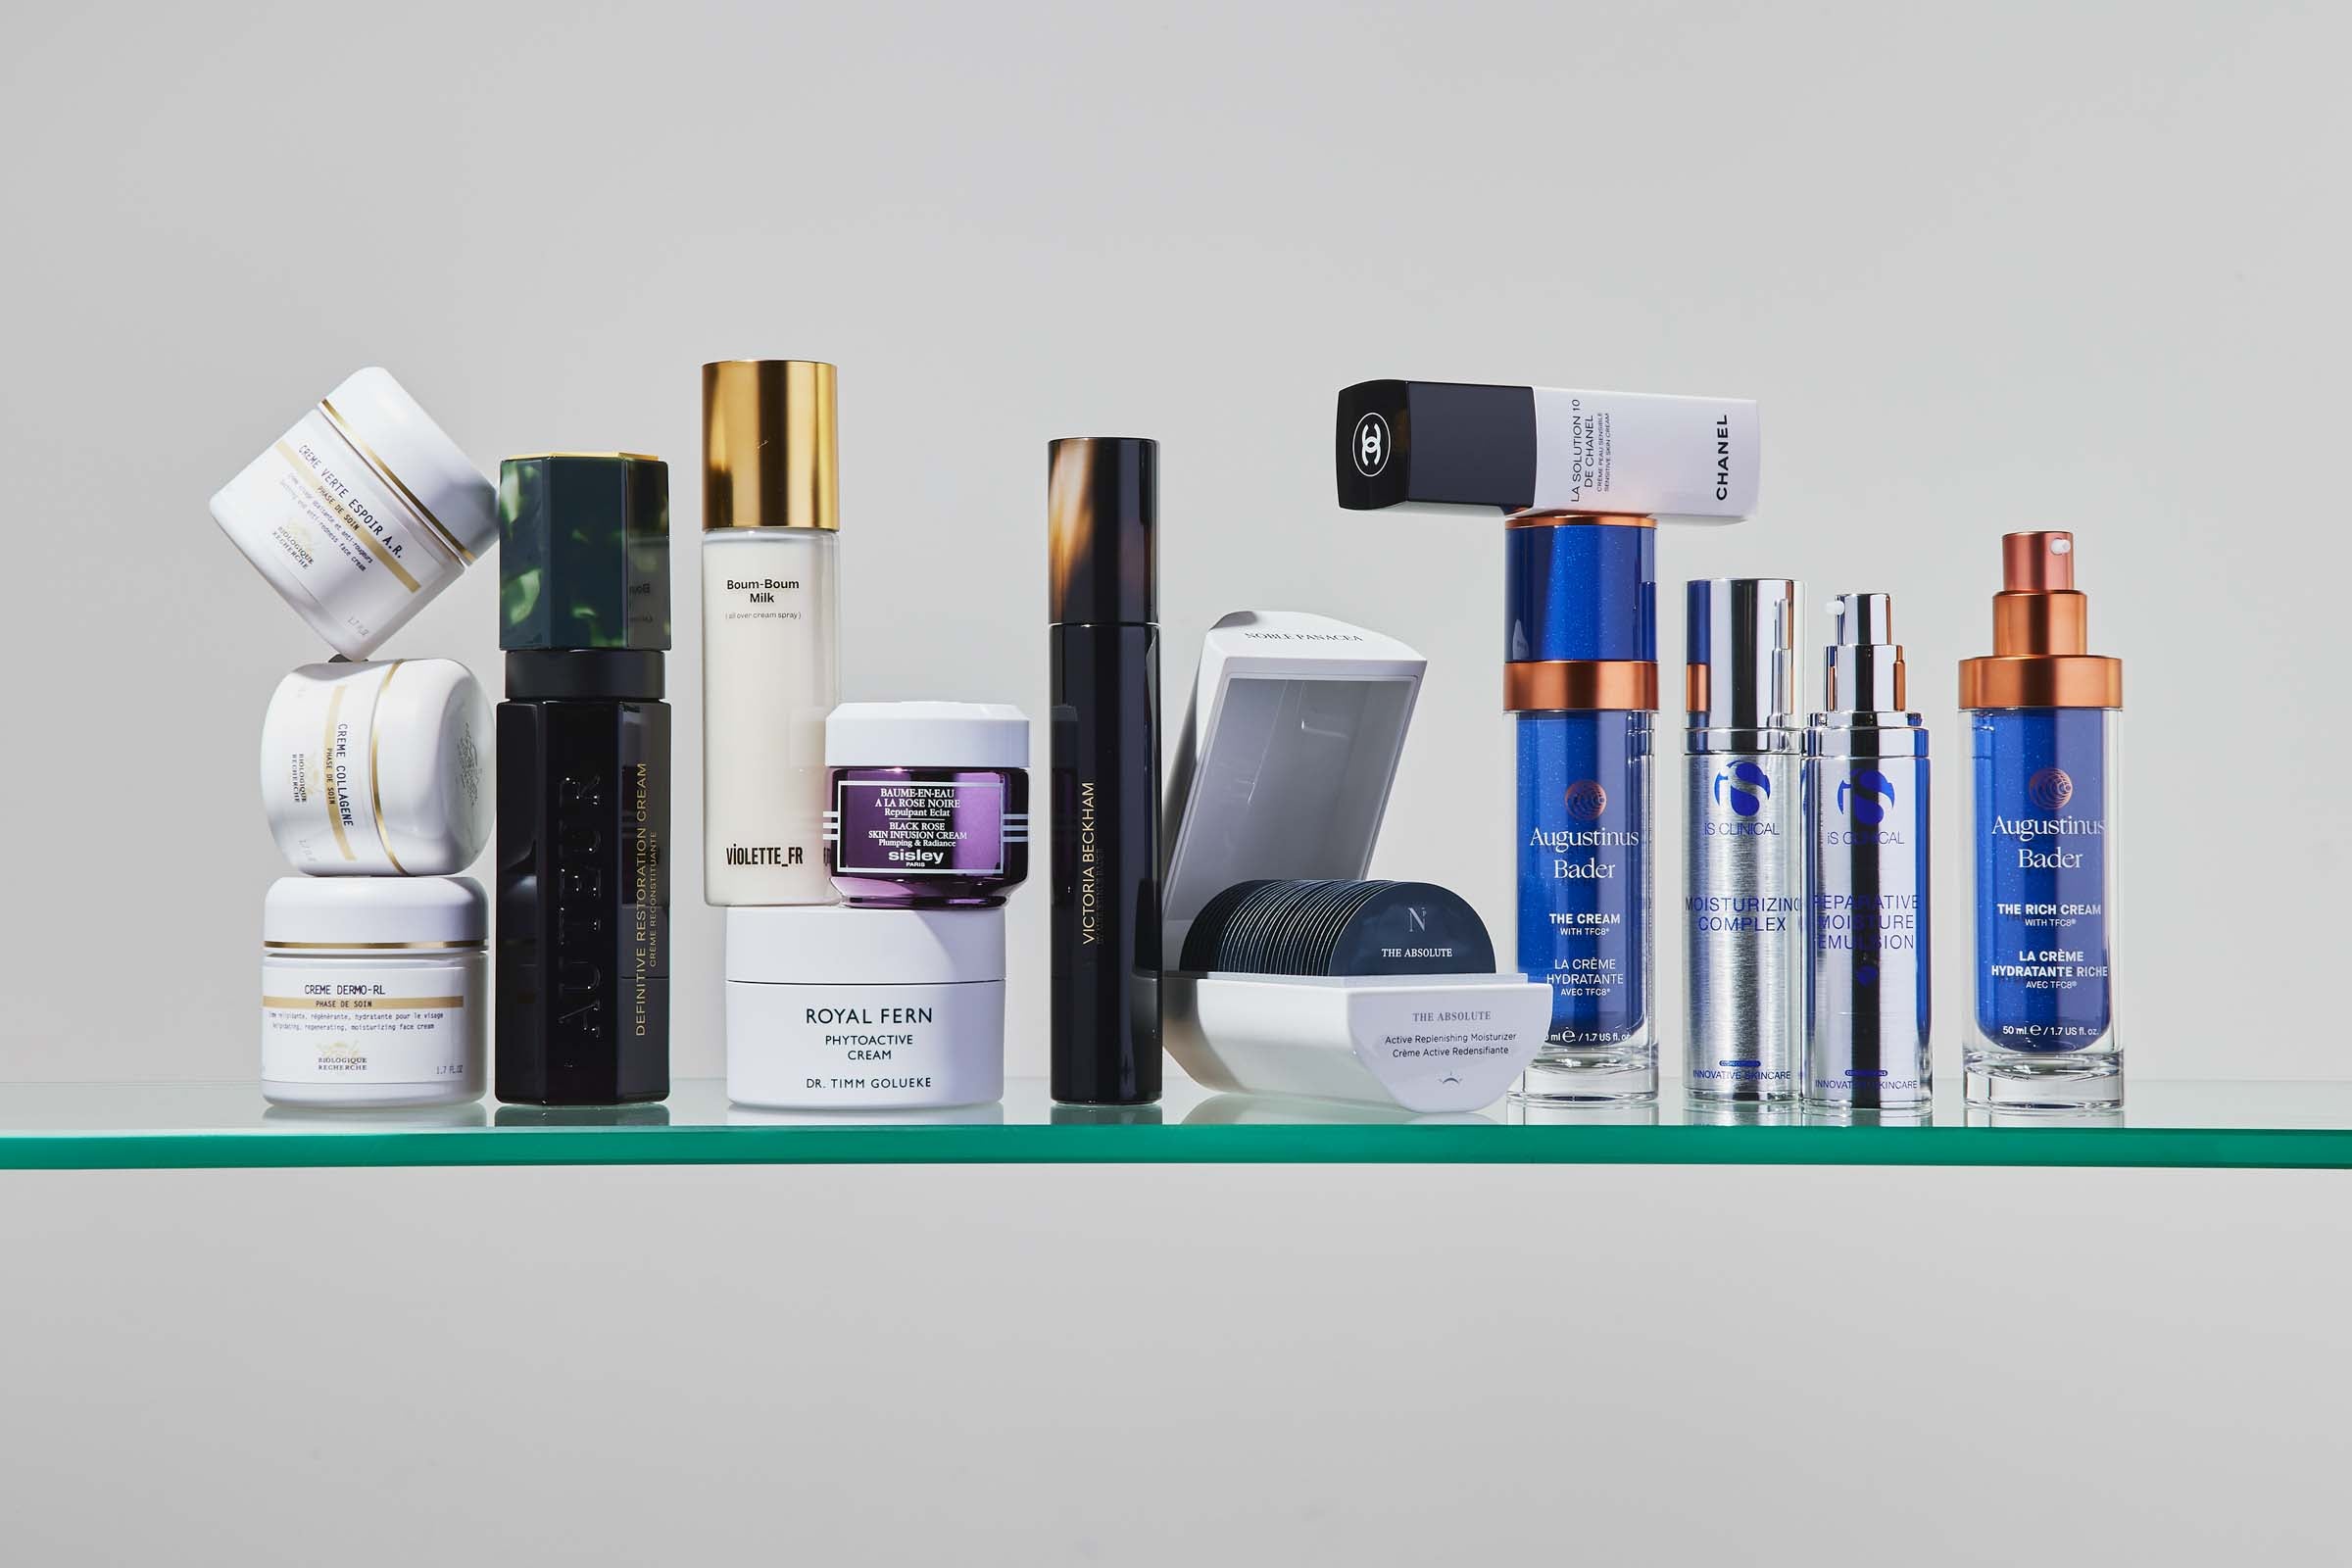 moisturisers and creams by victoria beckham beauty u beauty augustinus bader biologique recherche sisley and royal fern at skincare edit by melanie grant